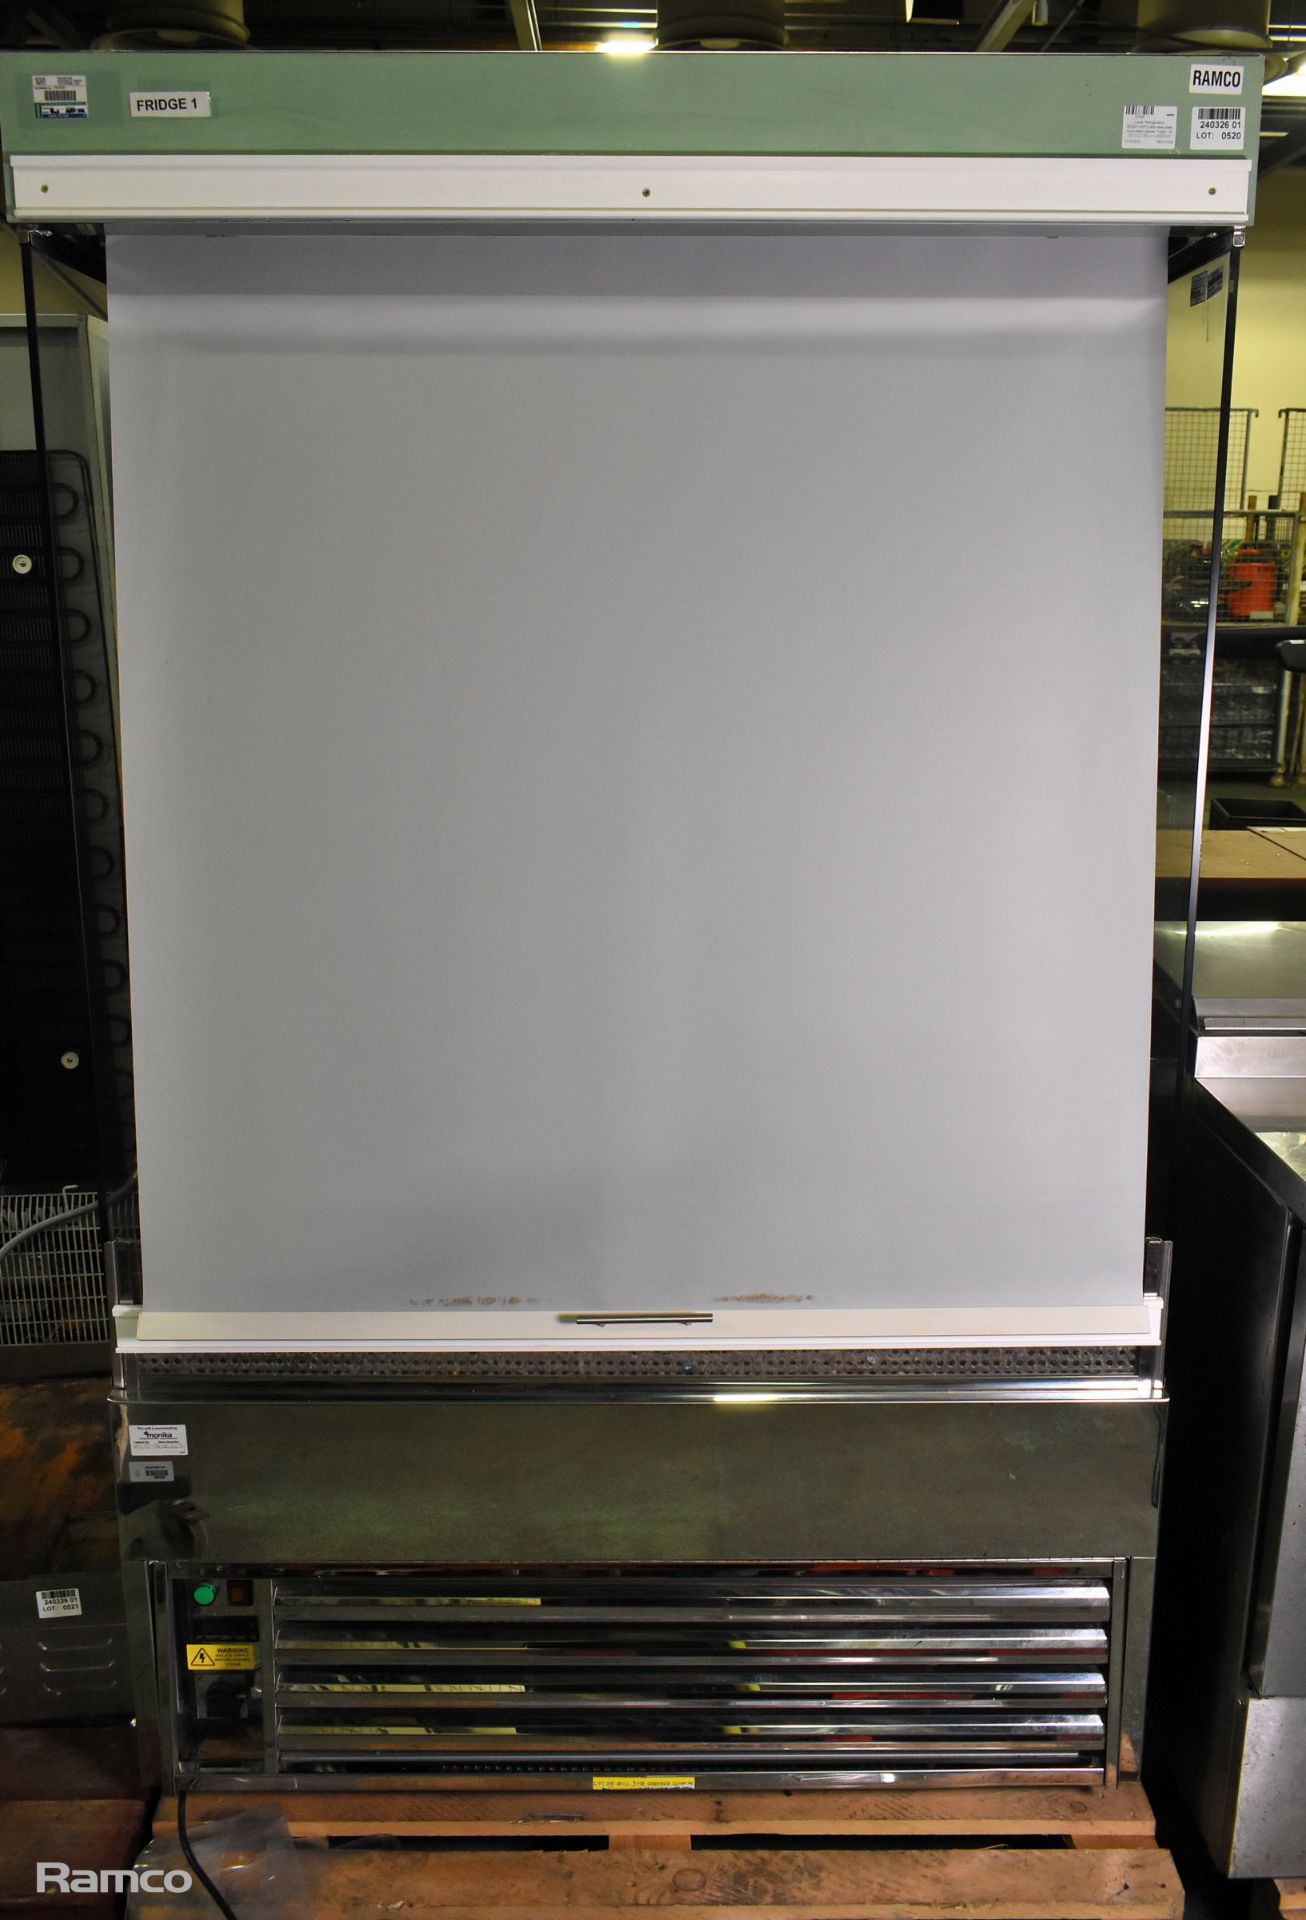 Lowe Refrigeration SD60/120 FG stainless steel multideck display fridge - W 1210 x D 600 x H 2000mm - Image 6 of 9